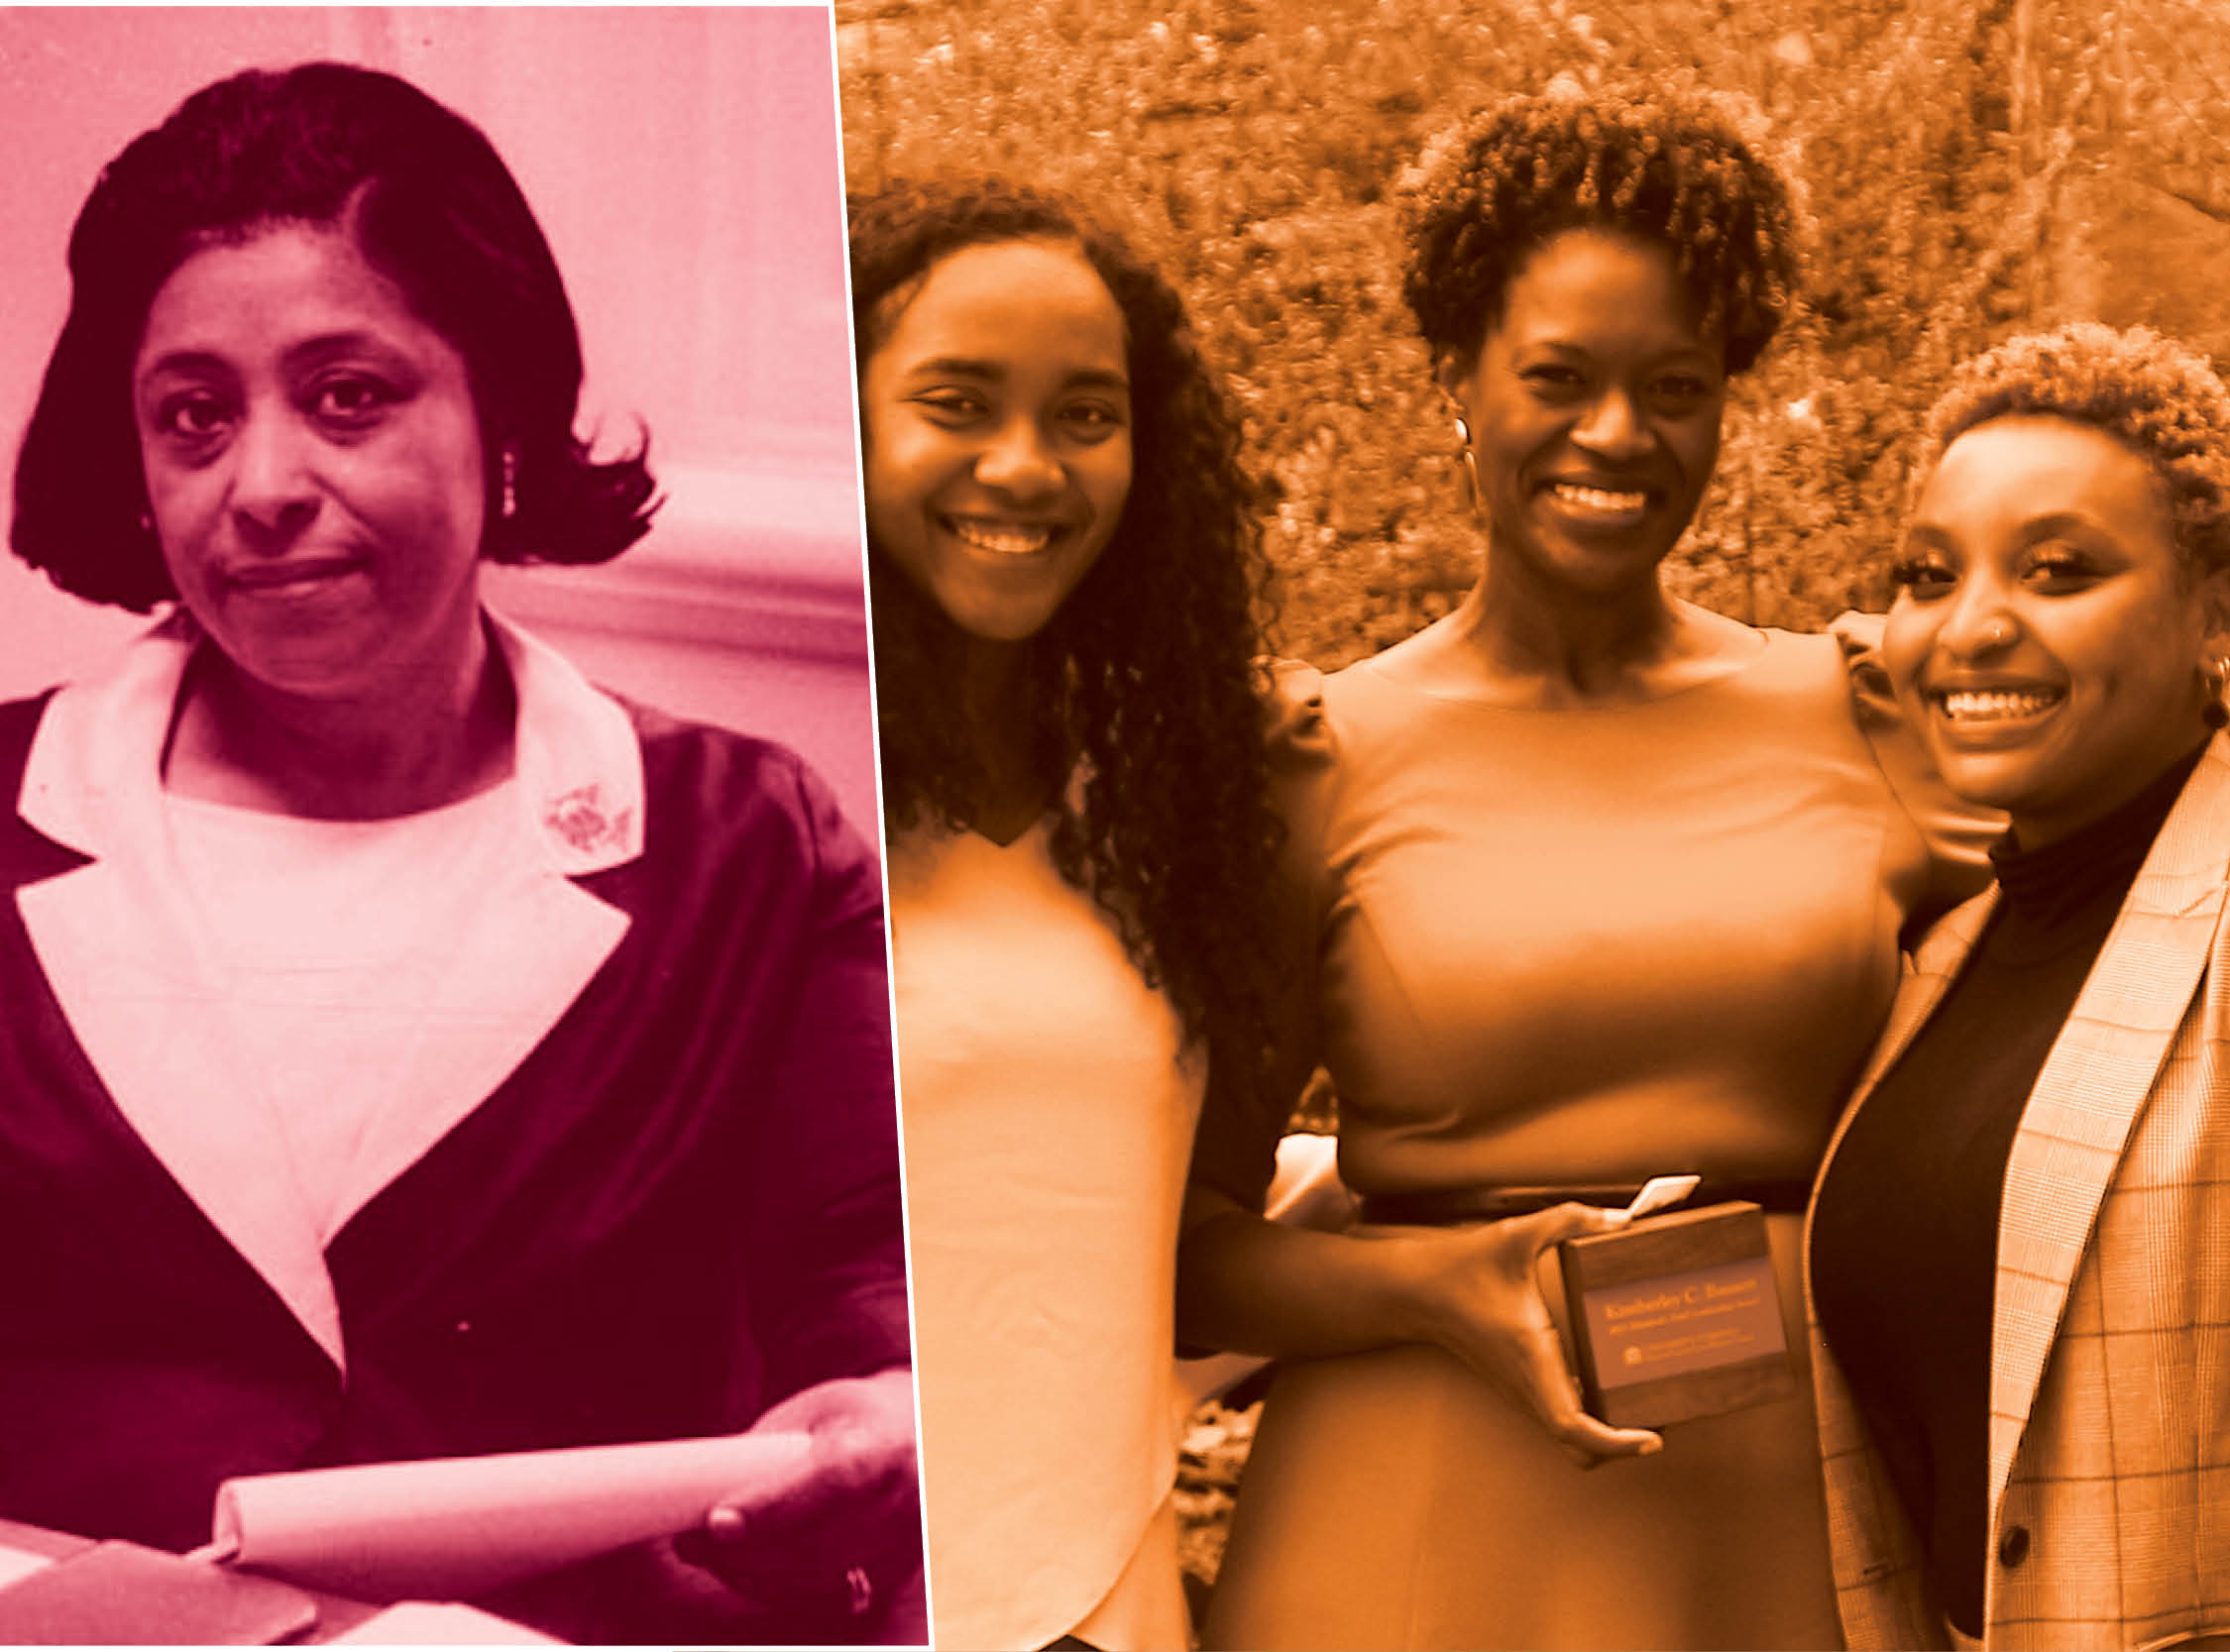 Elizabeth Johnson (left photo) prioritized recruitment and retention of Black students during her service as UVA's first full-time Black admissions officer. Students who served as senior peer advisors with OAAA credit Kimberley Bassett (right photo) with advancing the next generation of leaders. 